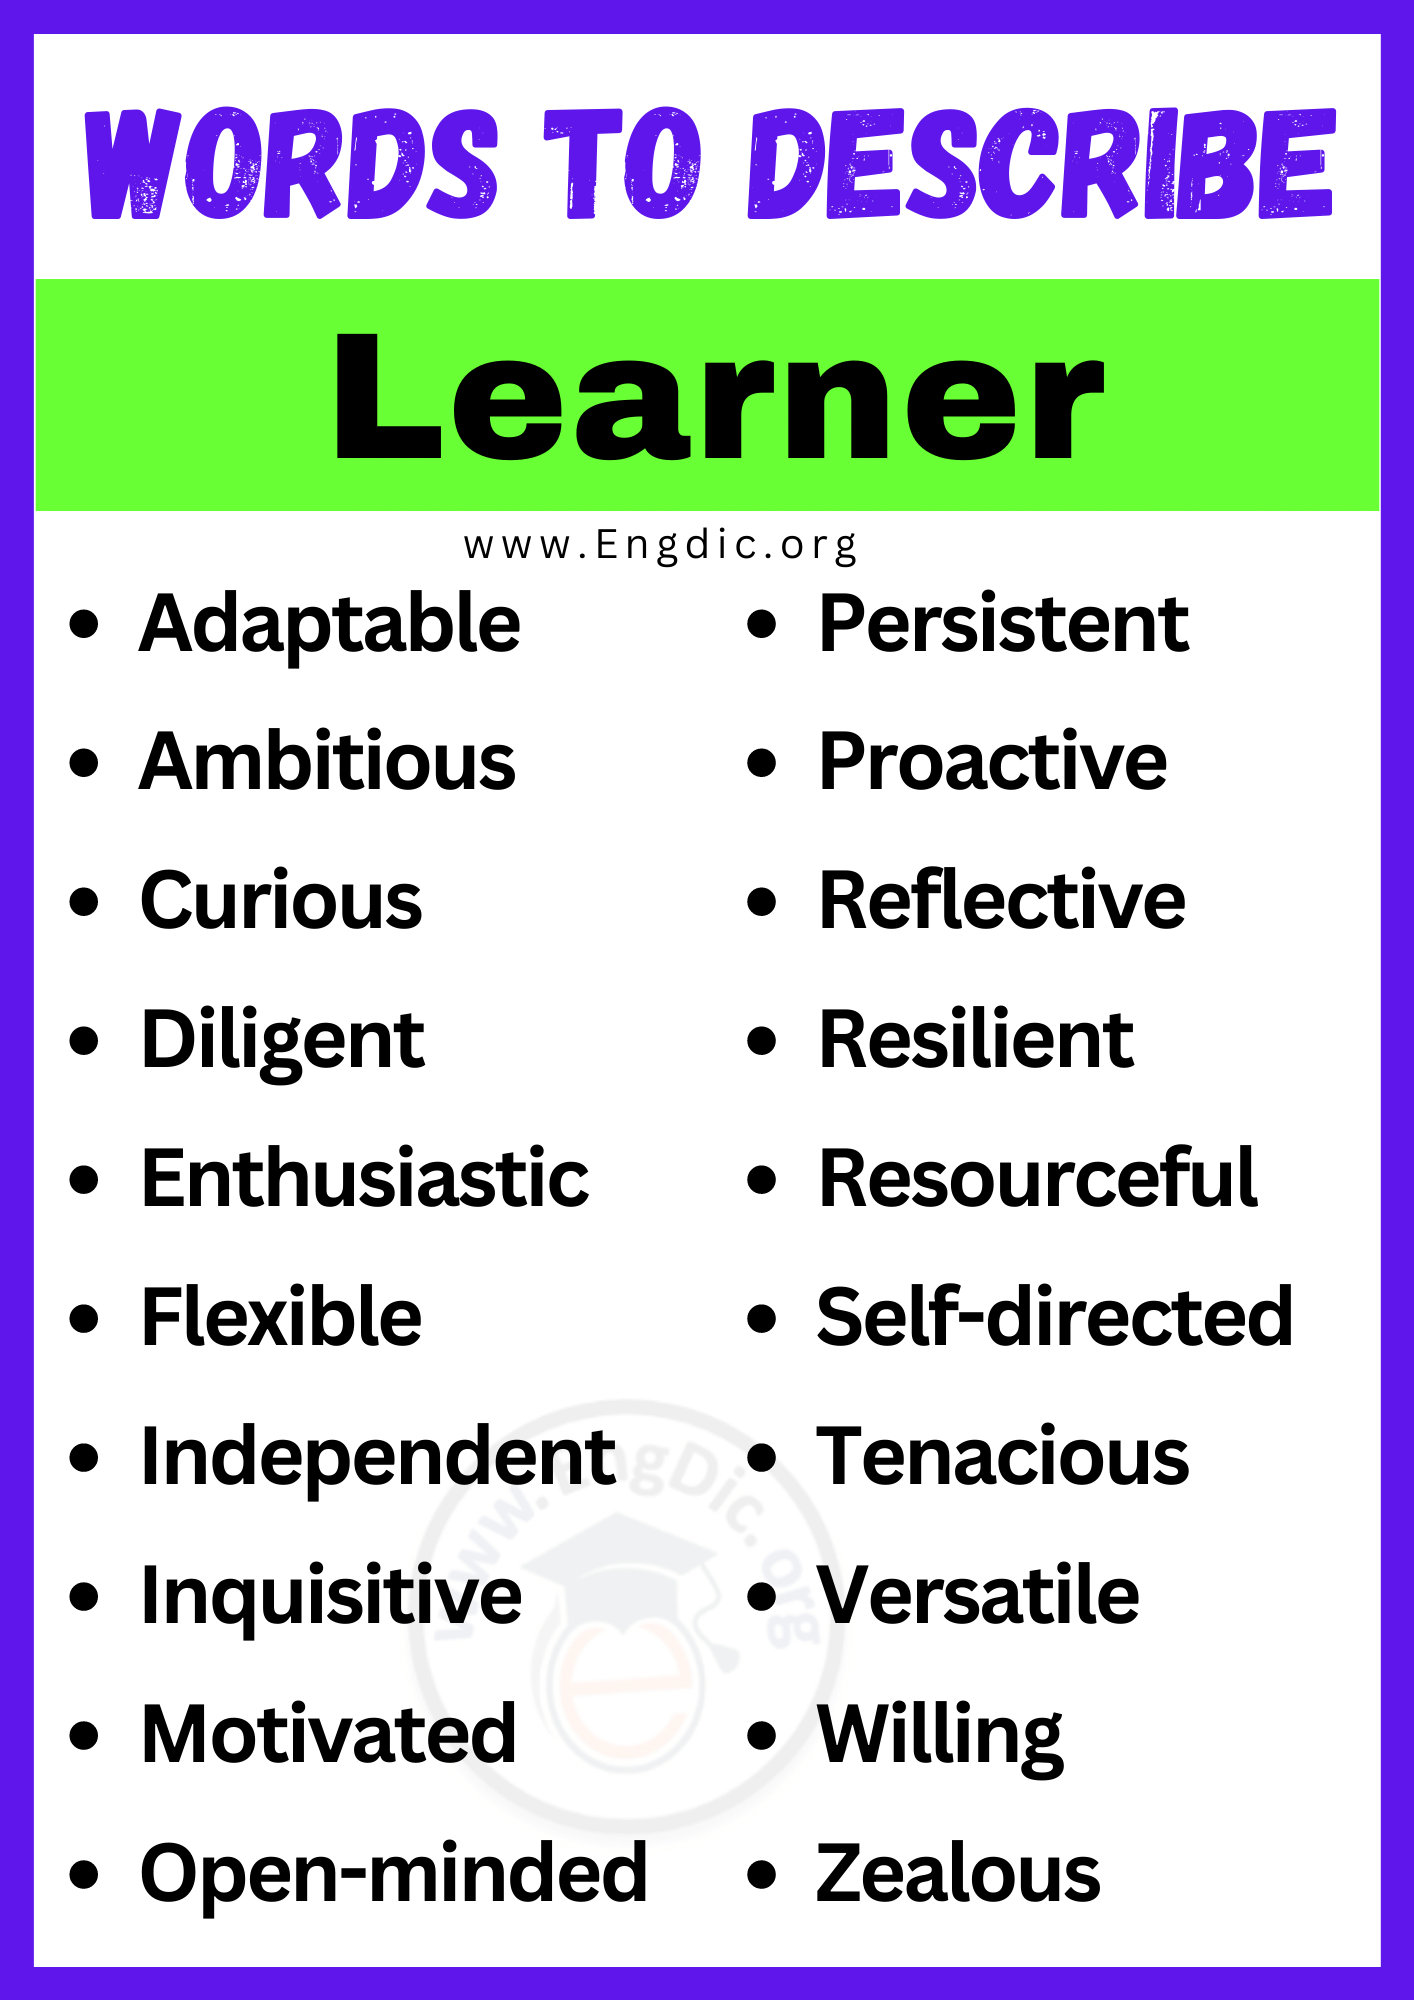 Words to Describe Learner